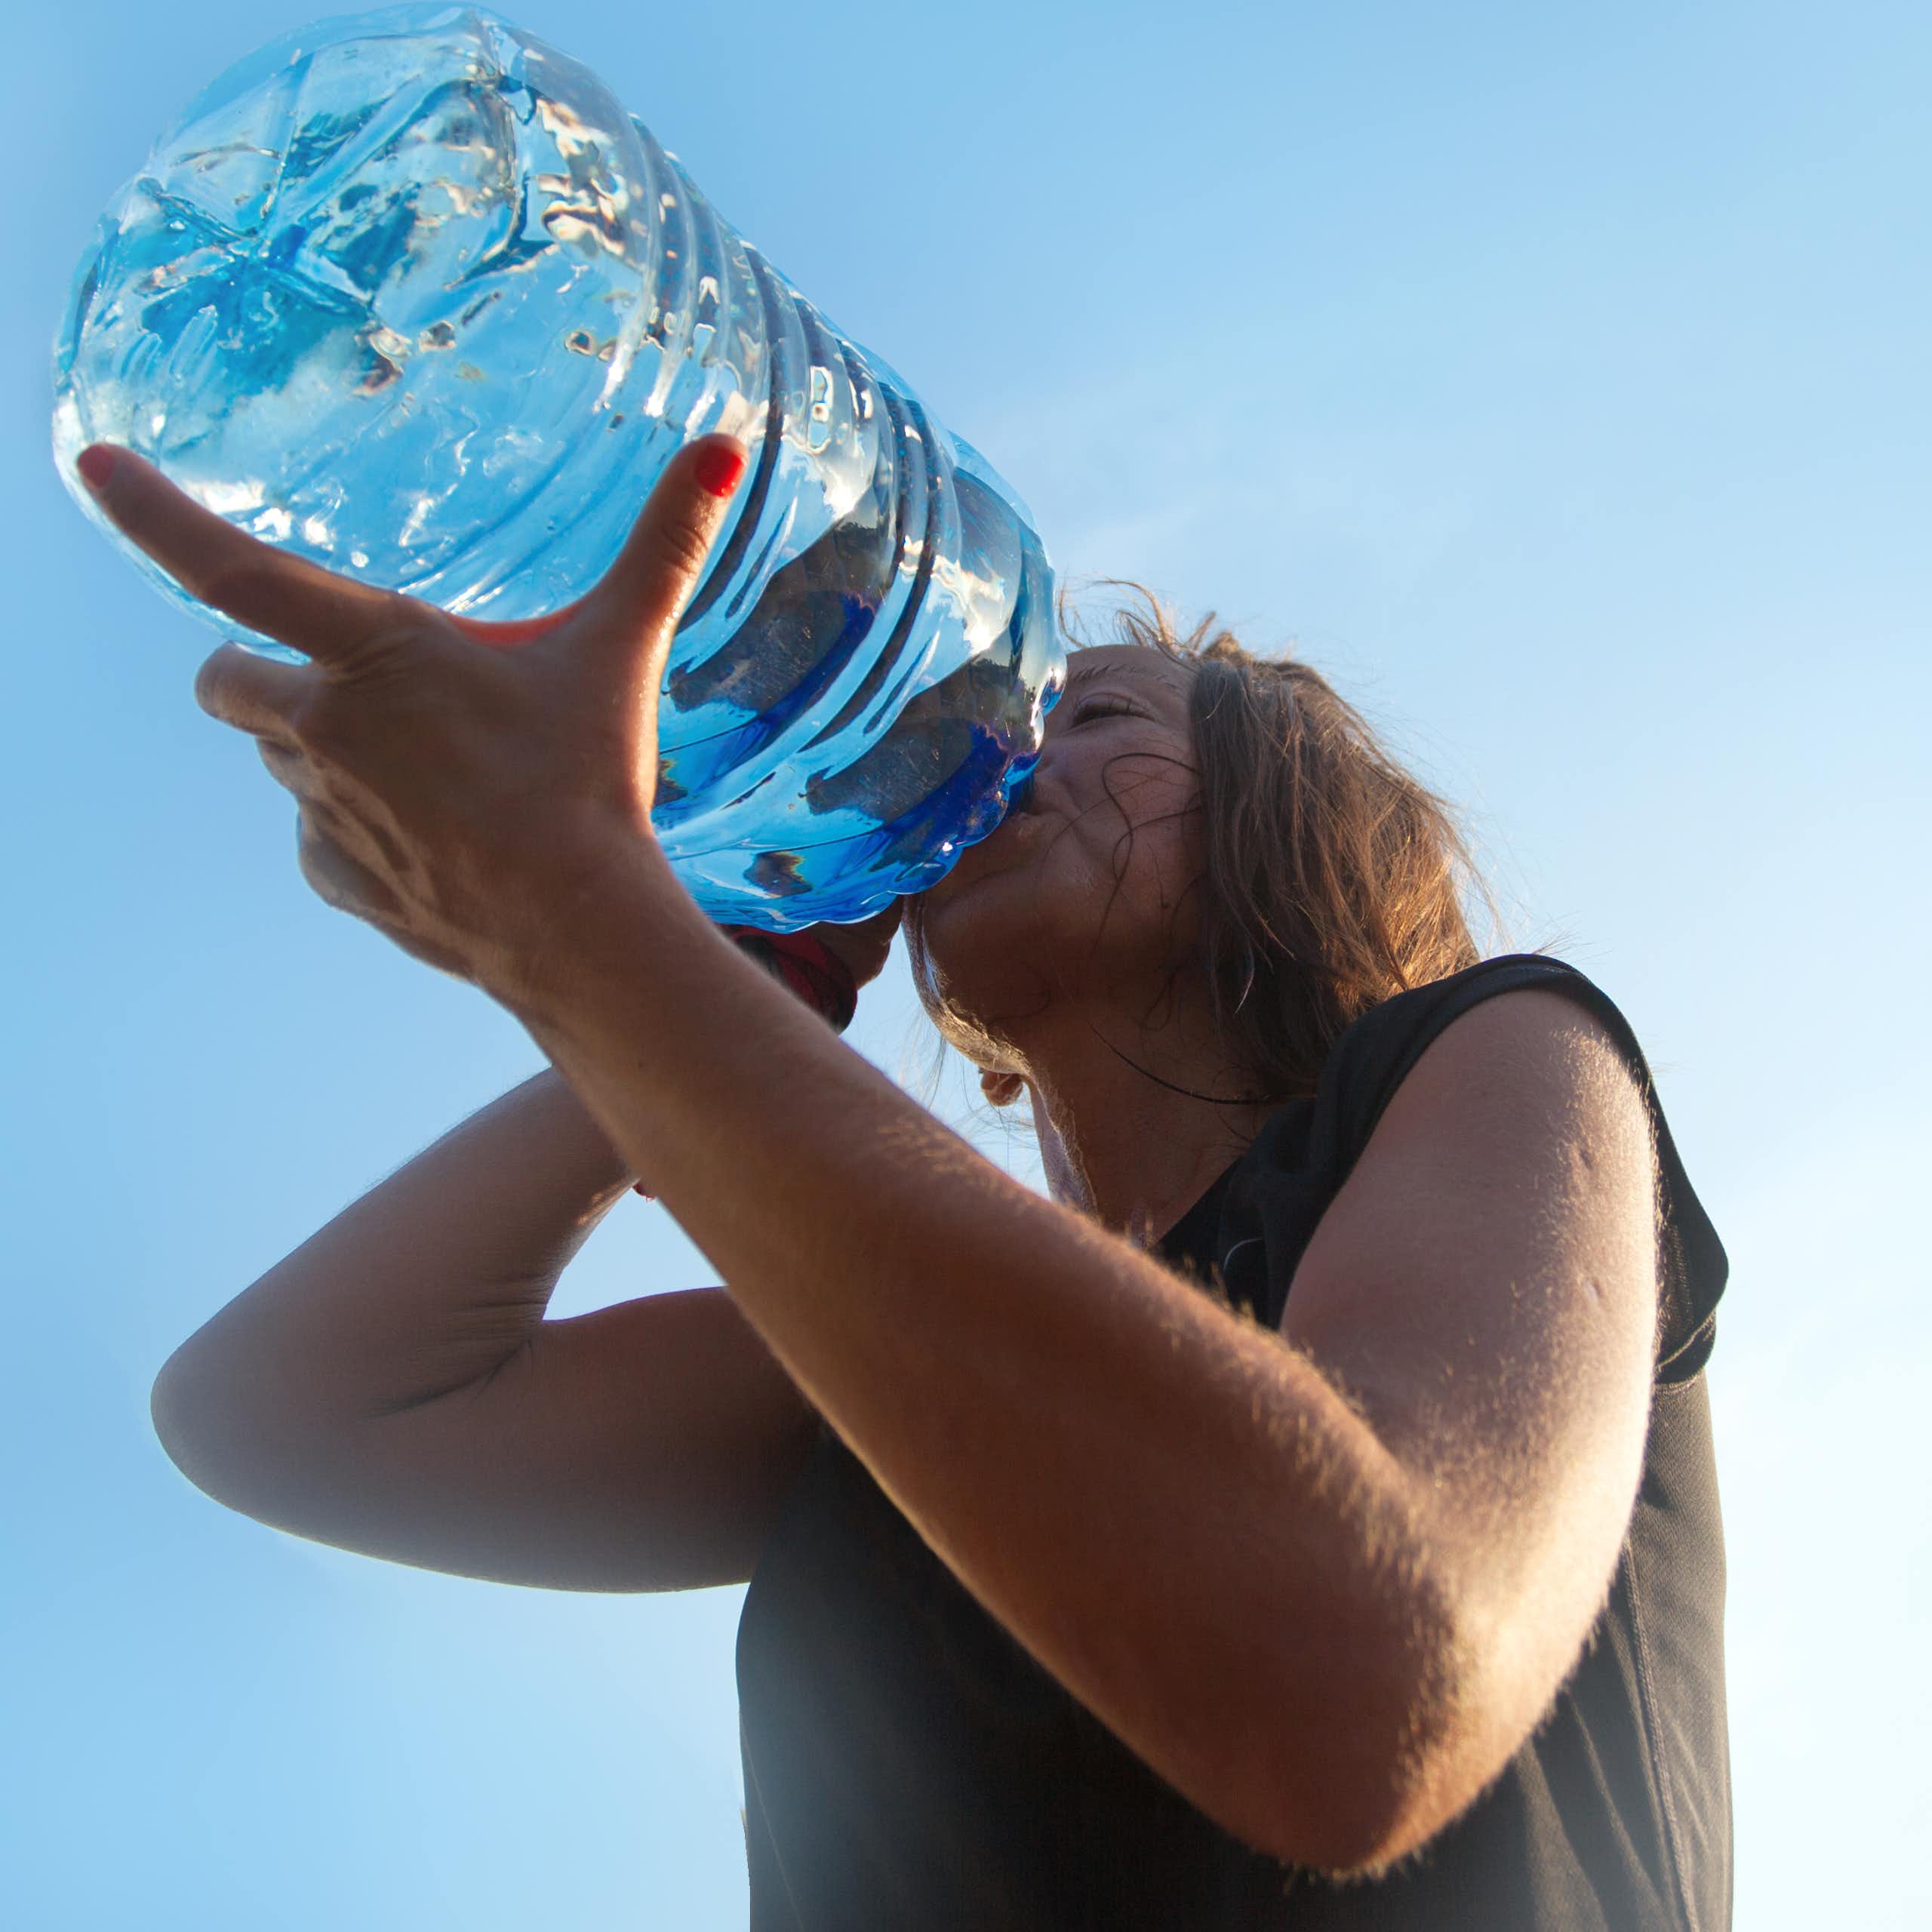 Drinking lots of water may seem like a healthy habit – here’s when and why it can prove toxic